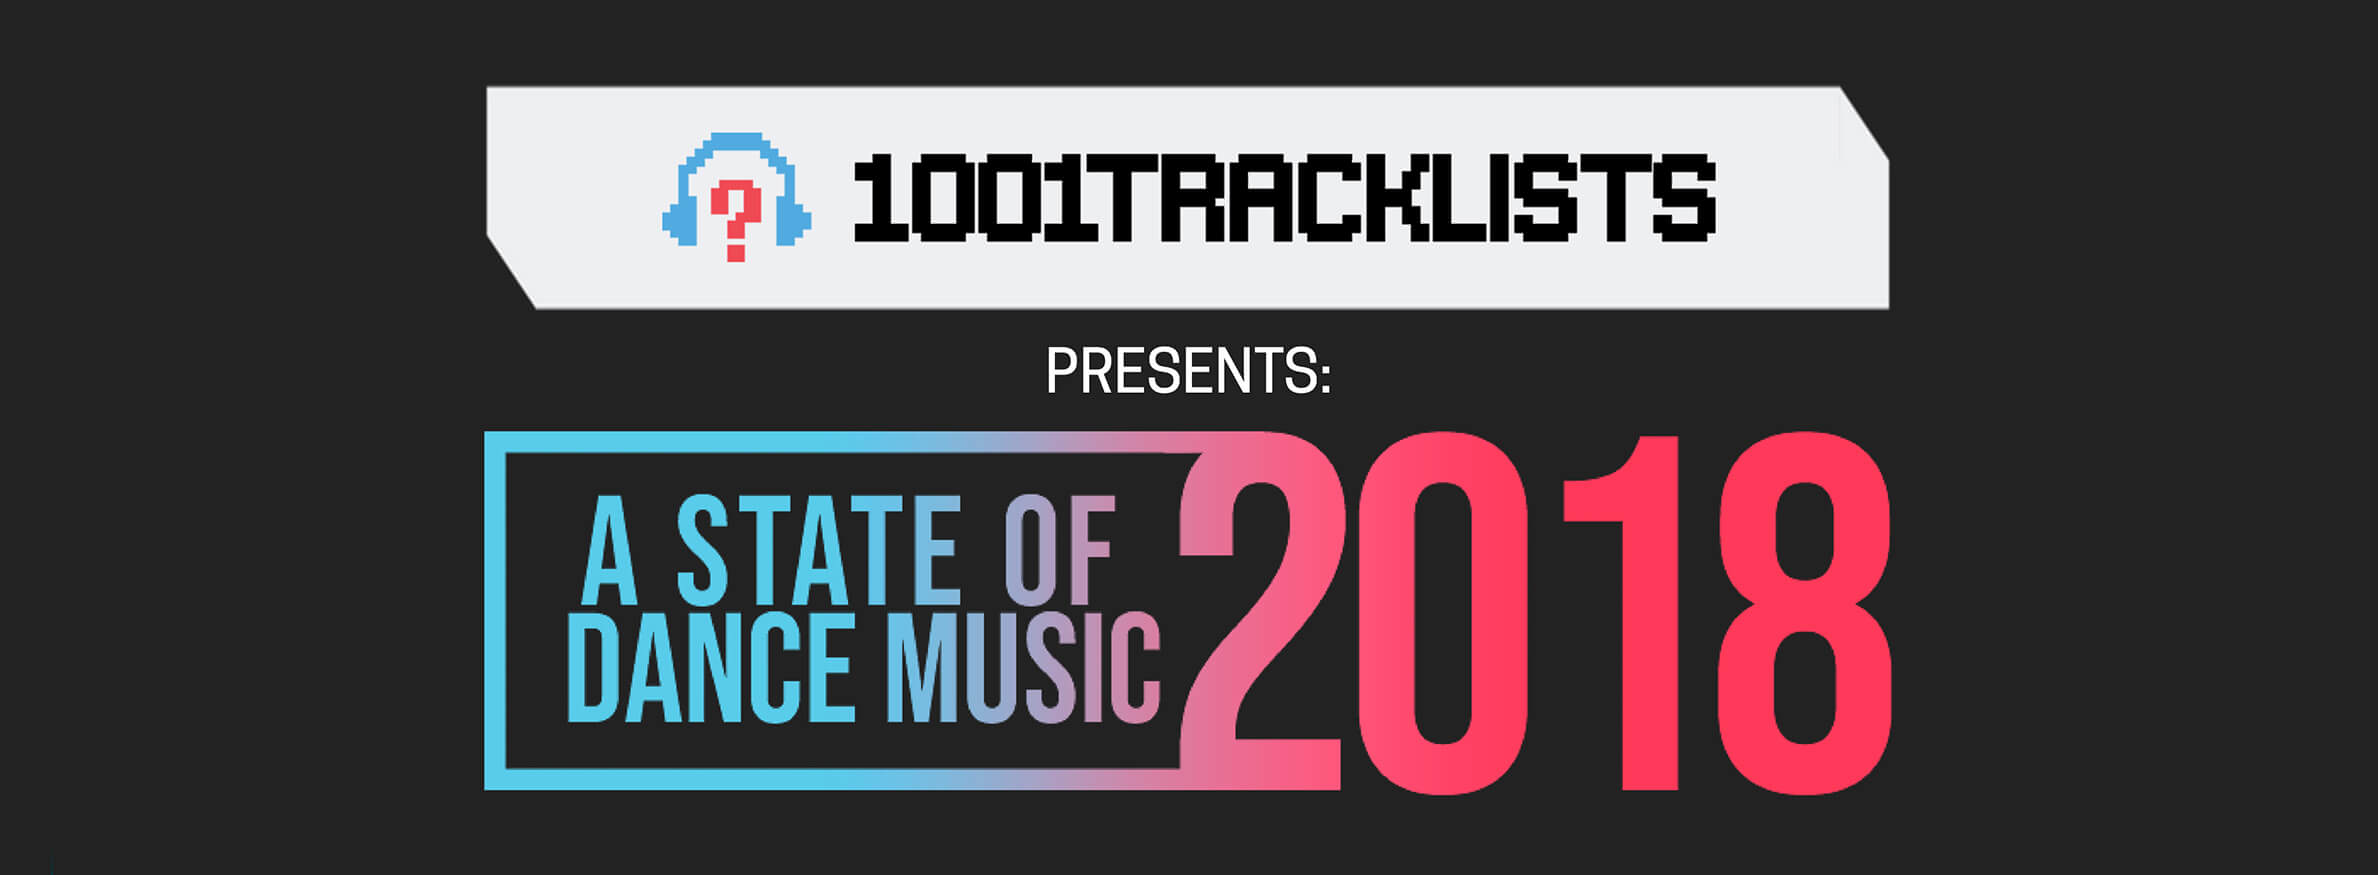 1001tracklists Công Bố Danh Sách A State Of Dance Music 2018